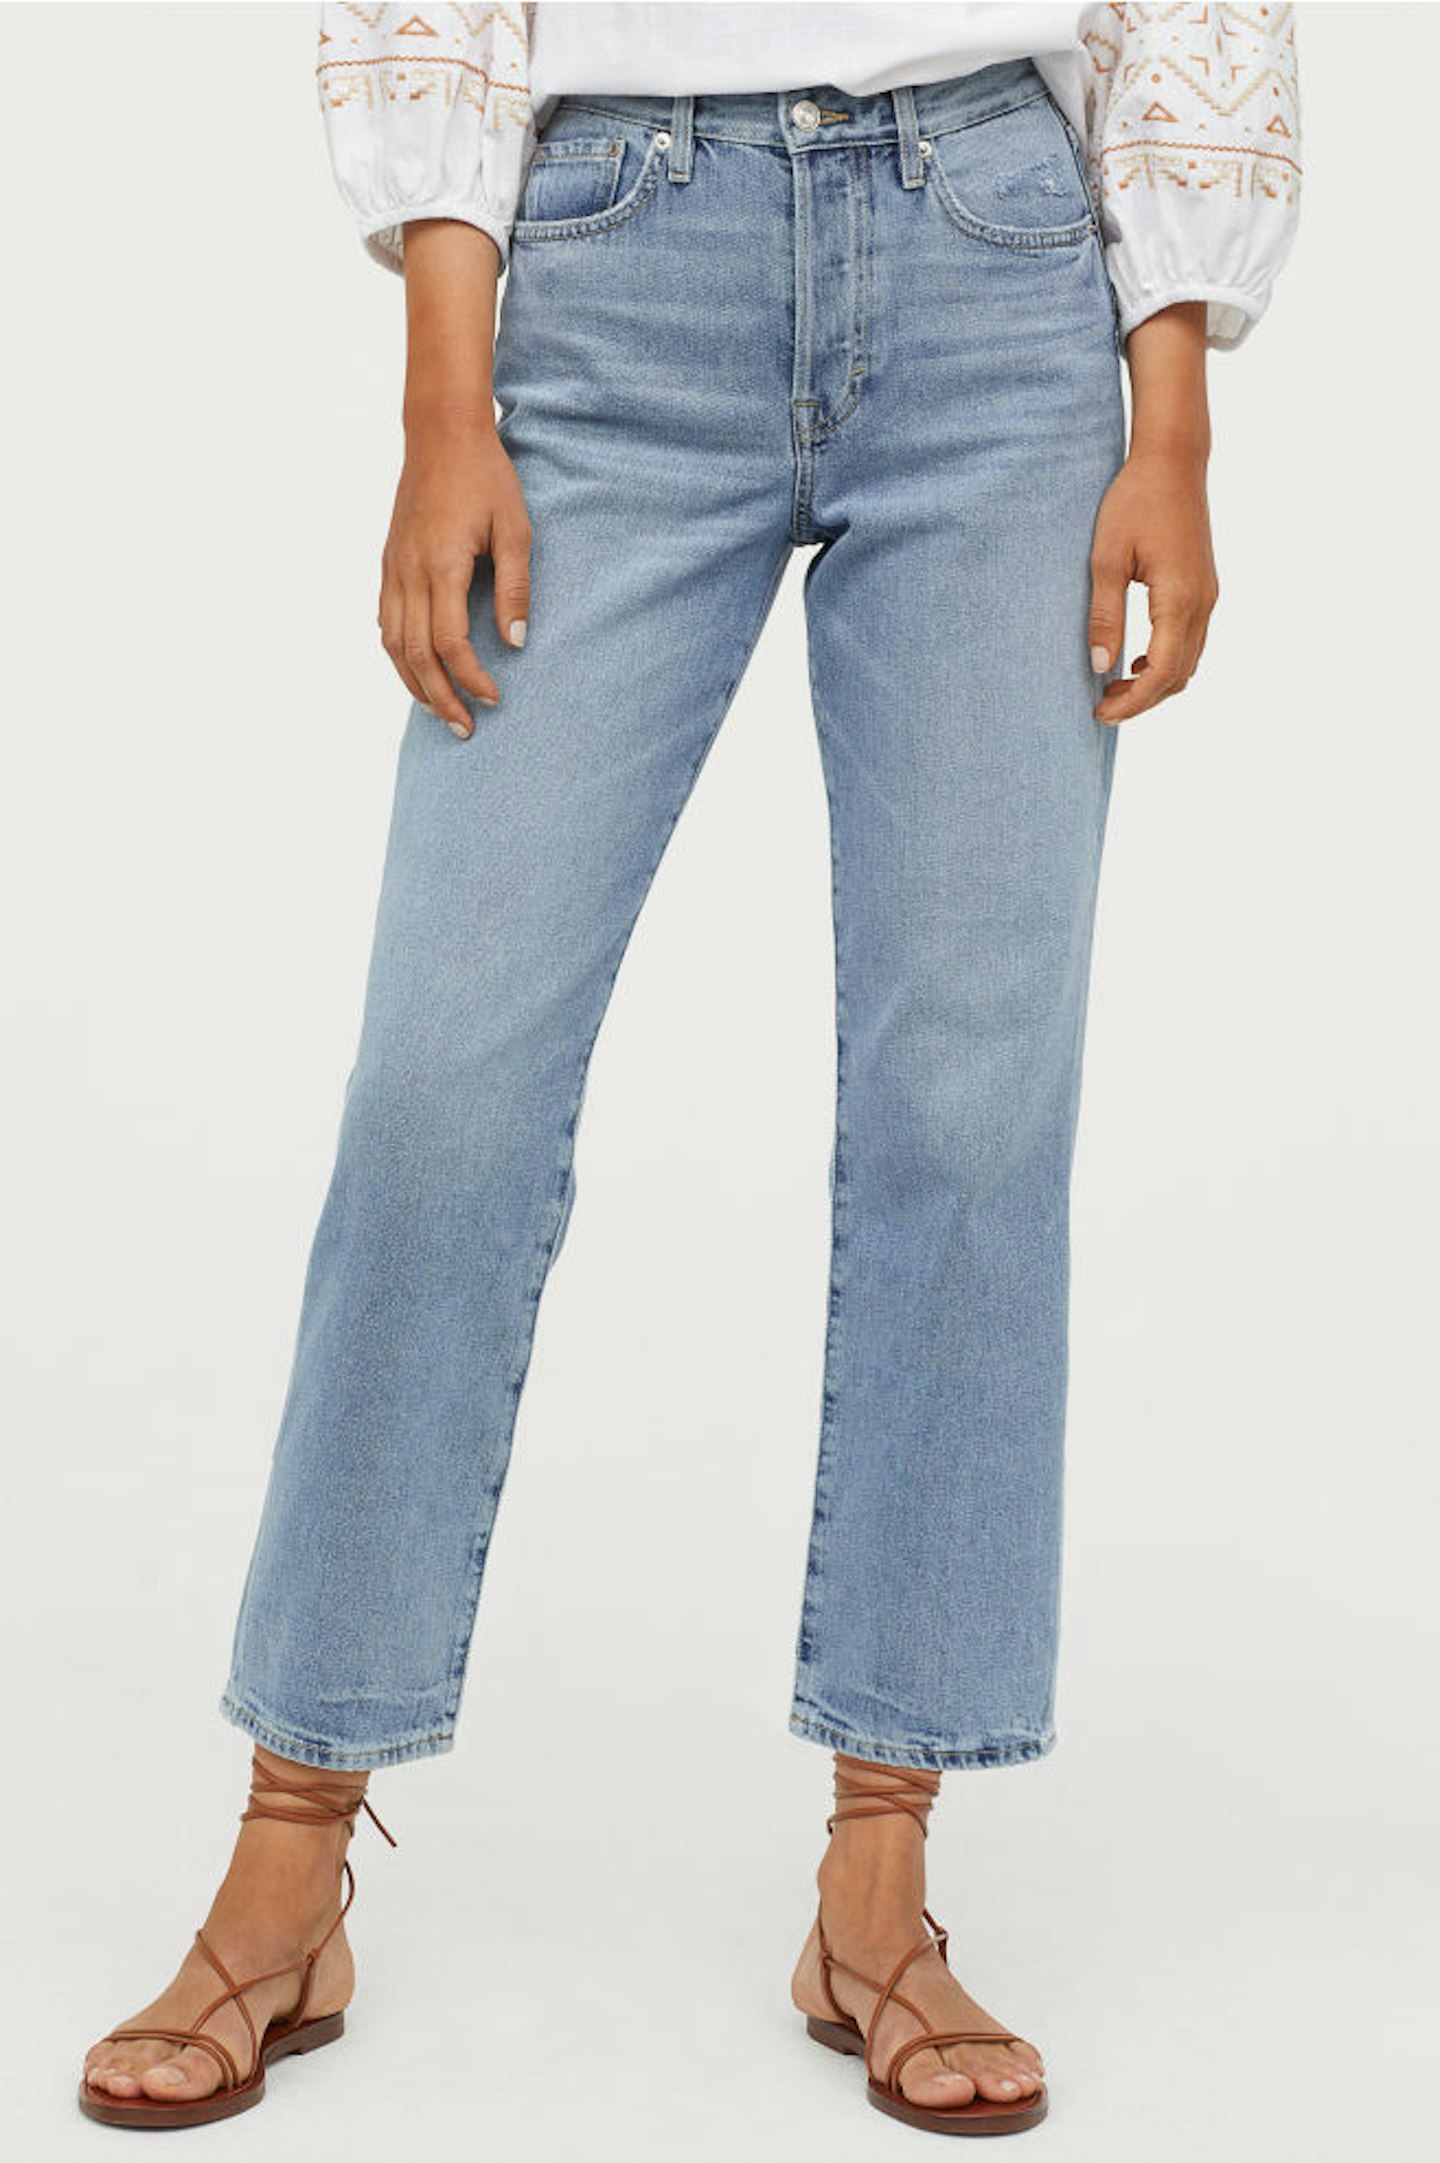 H&M, Straight High Ankle Jeans, £24.99